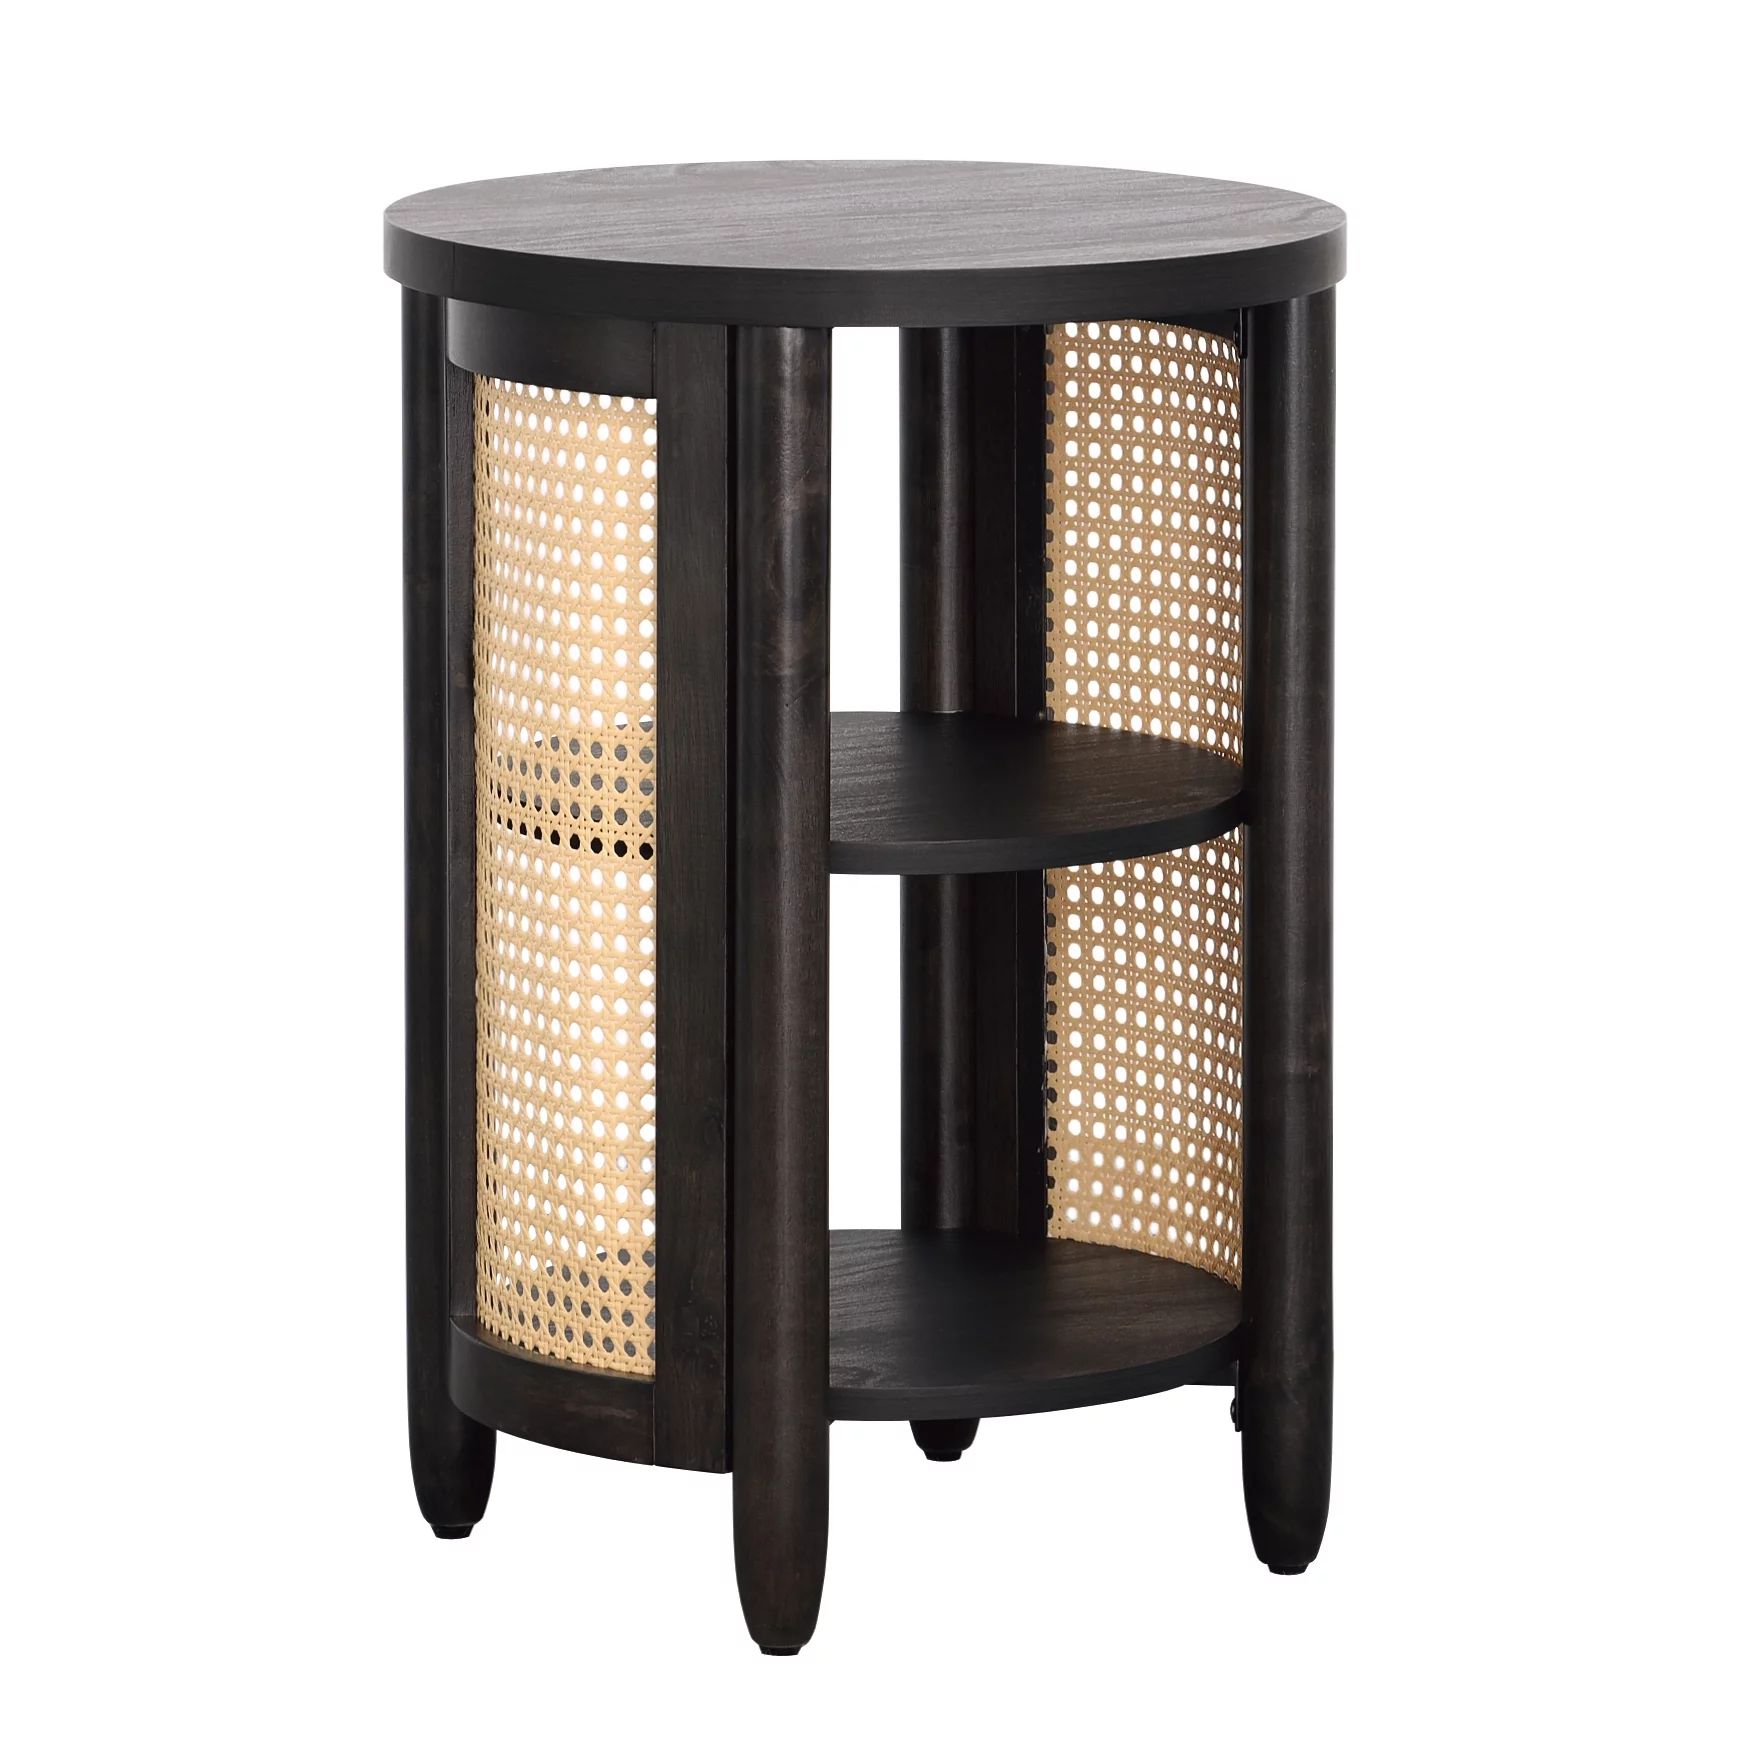 Better Homes & Gardens Springwood Caning Side Table, Charcoal Finish | Walmart (US)